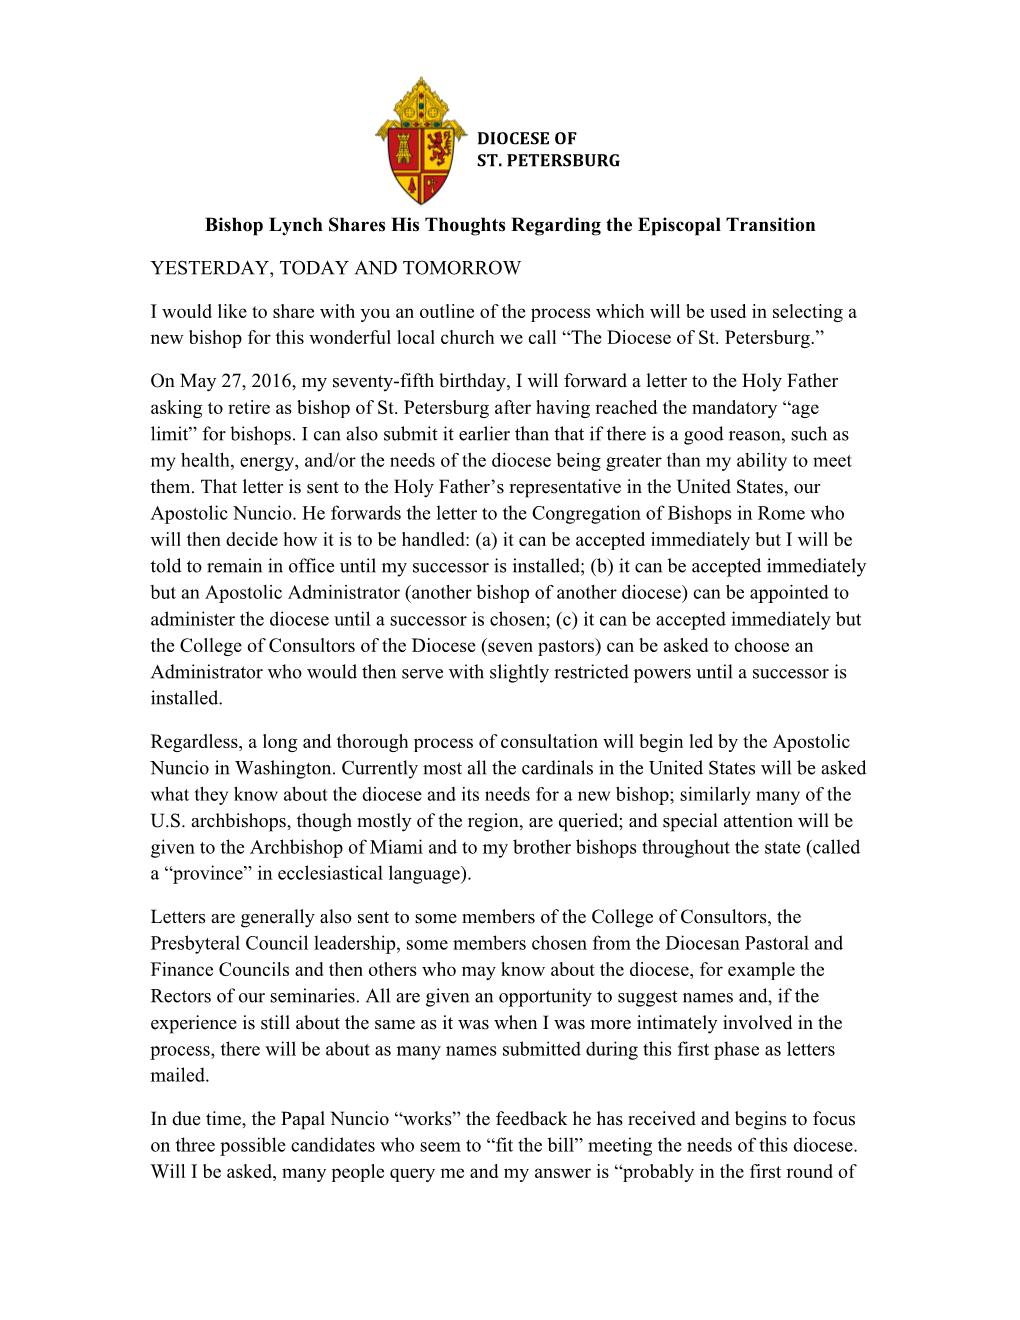 Bishop Lynch Shares His Thoughts Regarding the Episcopal Transition